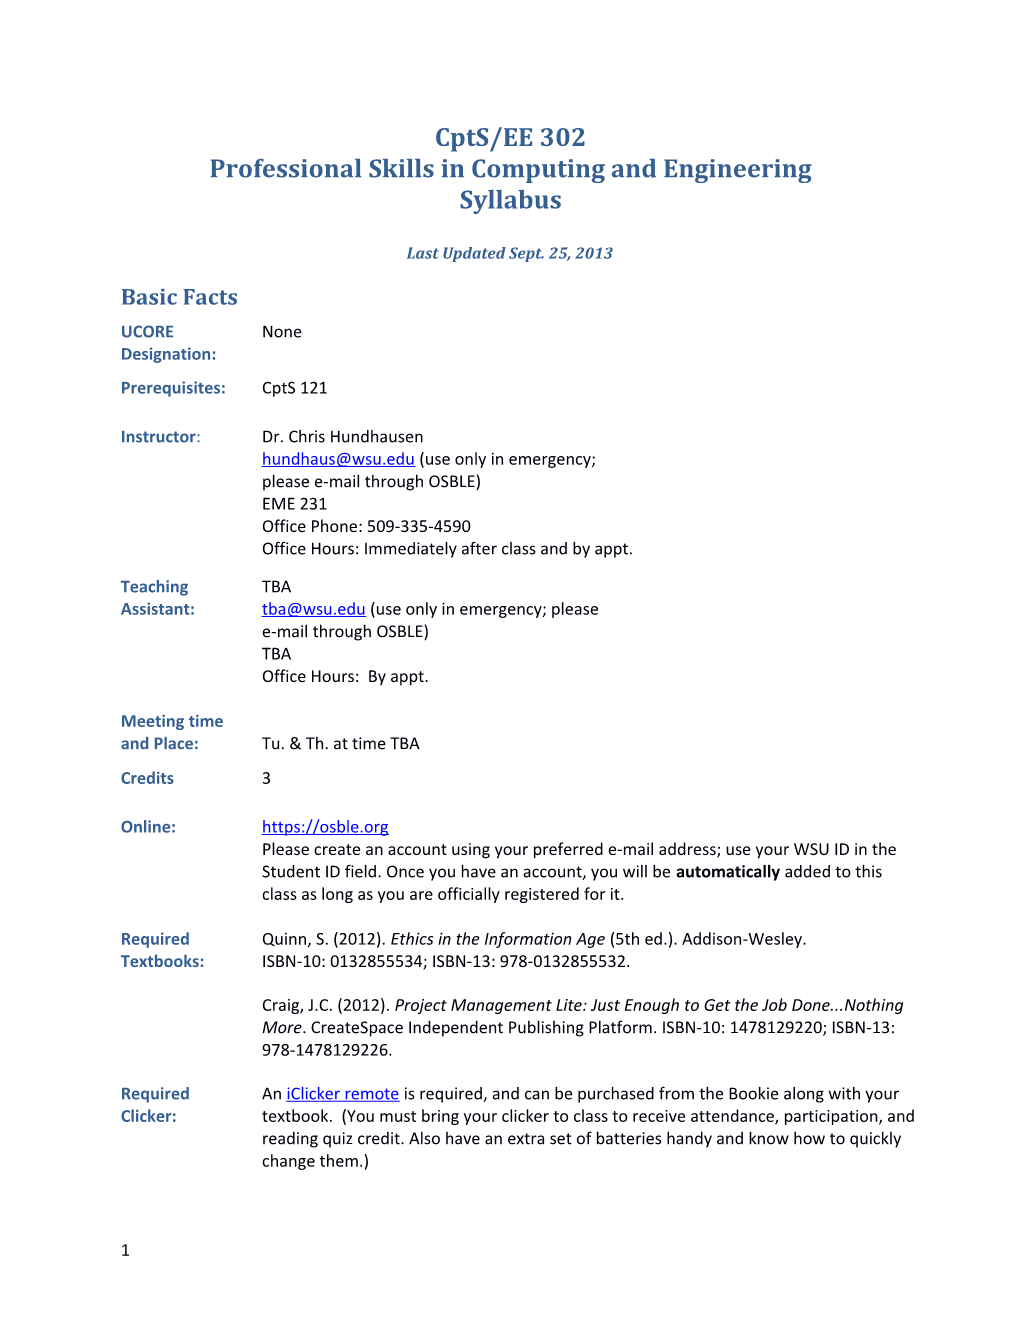 Cpts/EE 302 Professional Skills in Computing and Engineering Syllabus